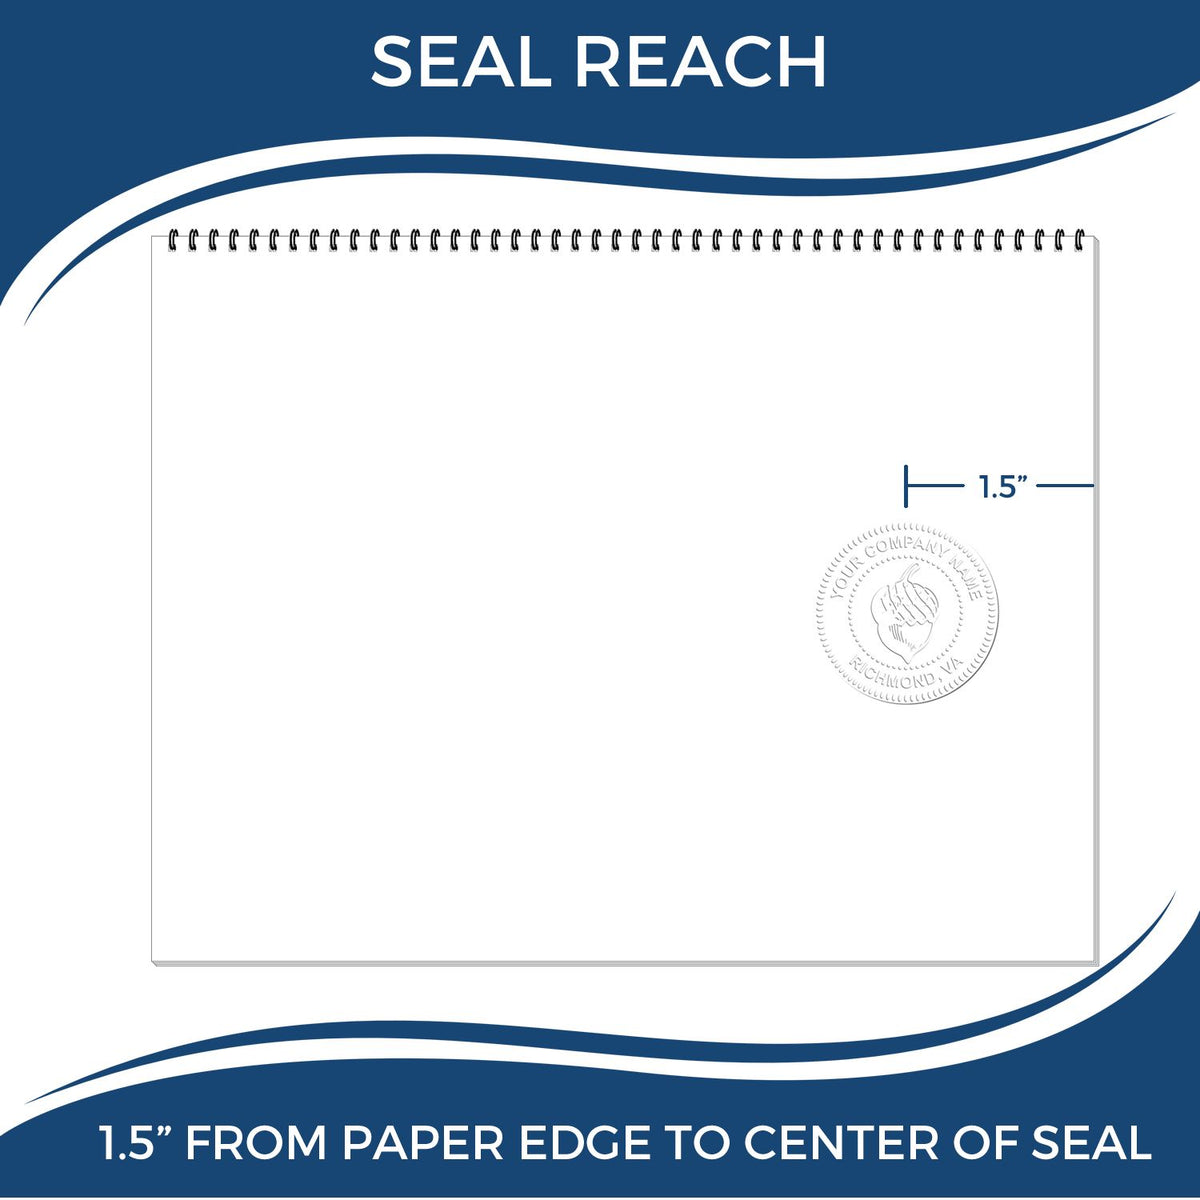 An infographic showing the seal reach which is represented by a ruler and a miniature seal image of the State of Montana Soft Land Surveyor Embossing Seal